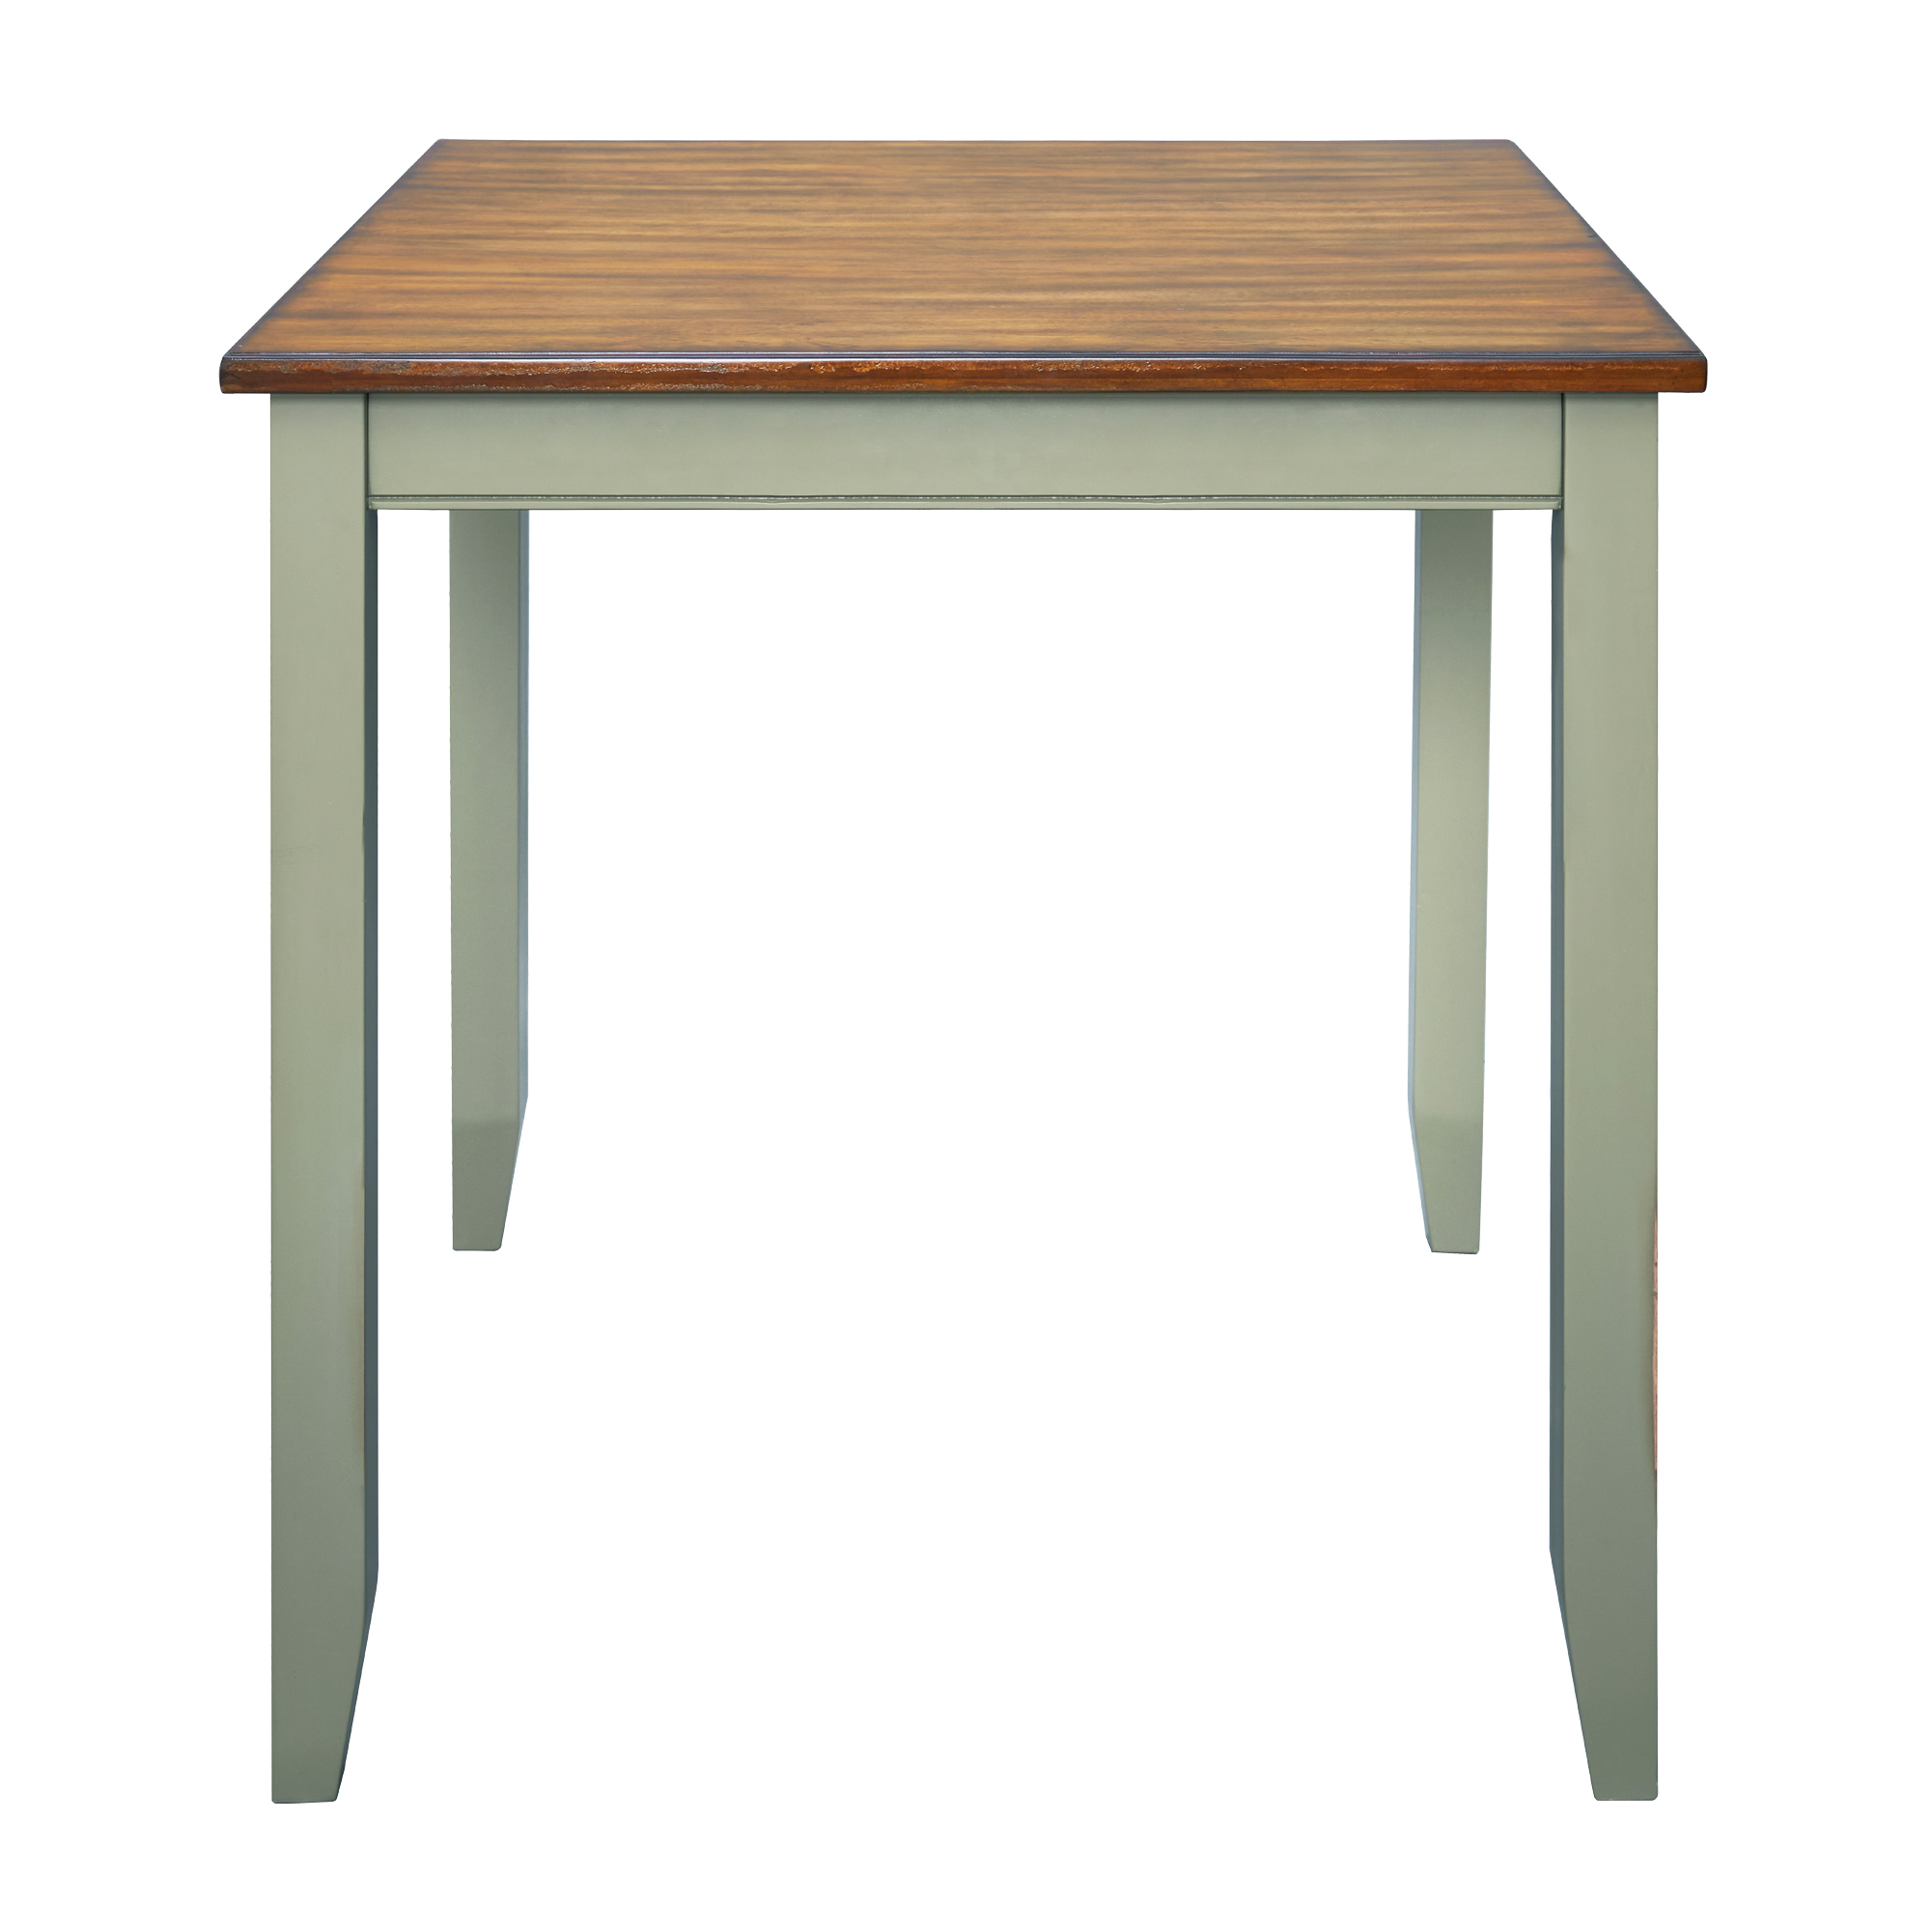 Farmhouse Rustic Wood Dining Table, Counter Height Dining Table, Green-Boyel Living